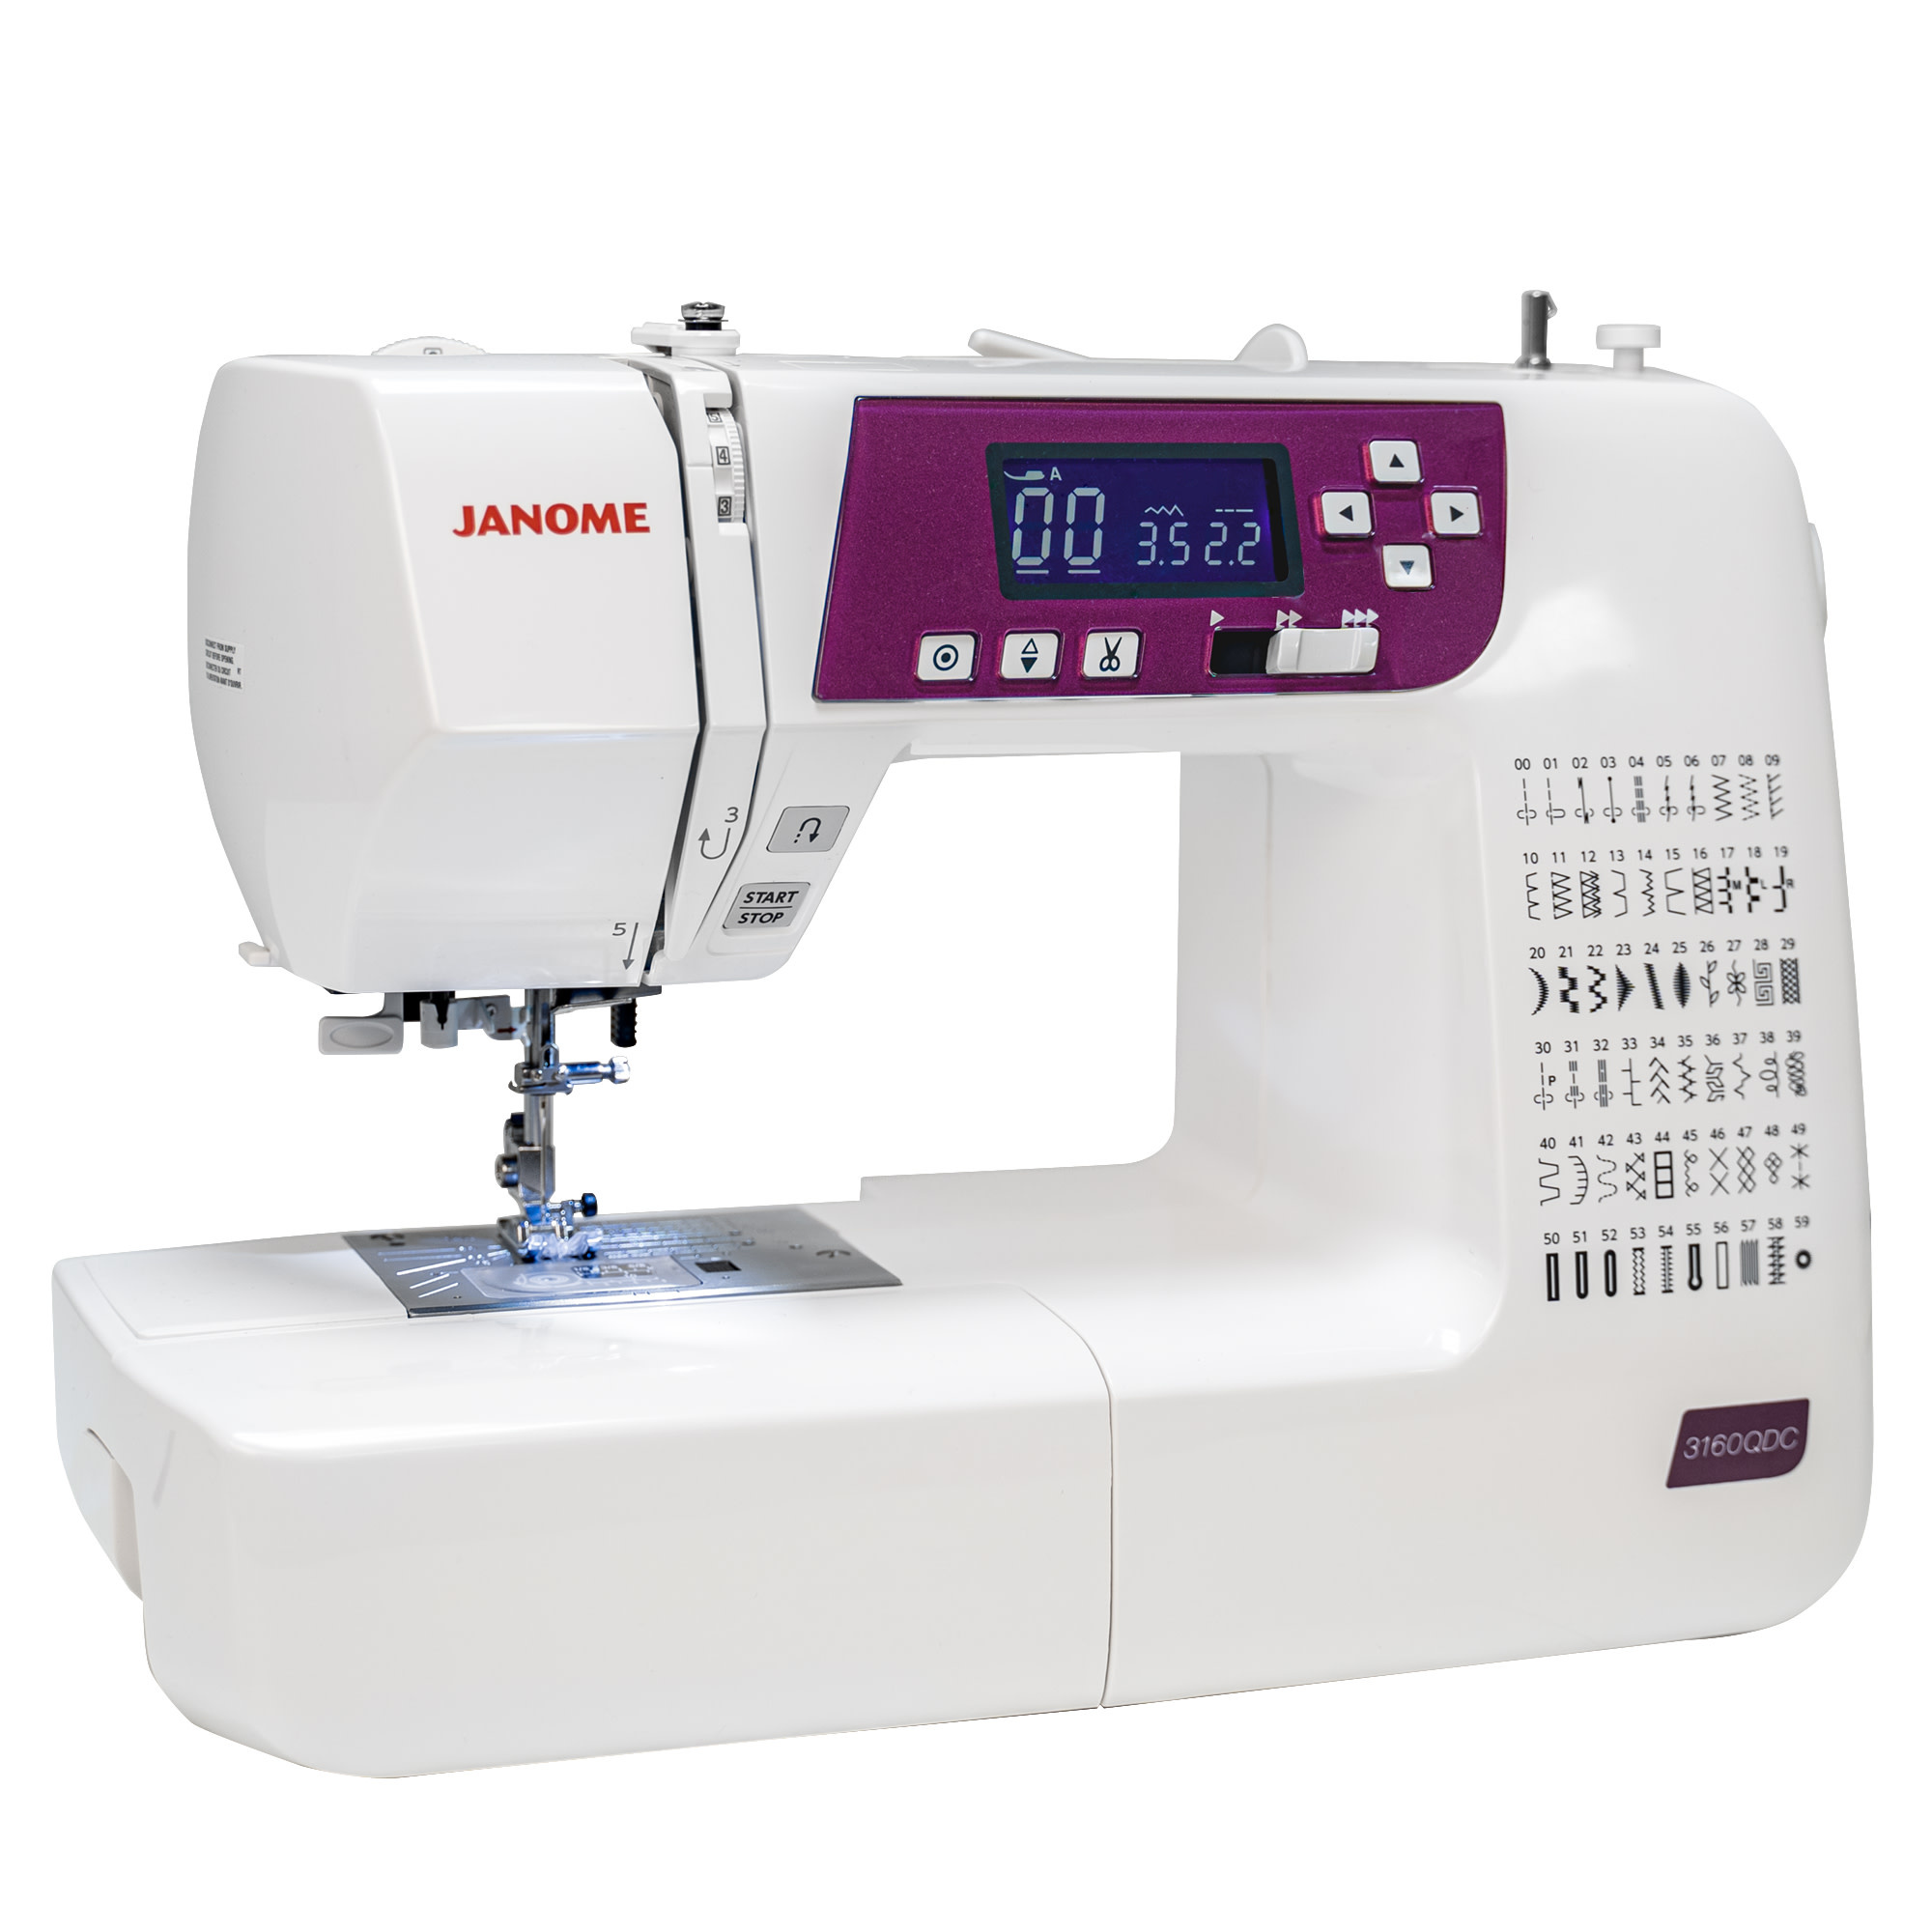 Janome Janome sewing 3160QDC-G